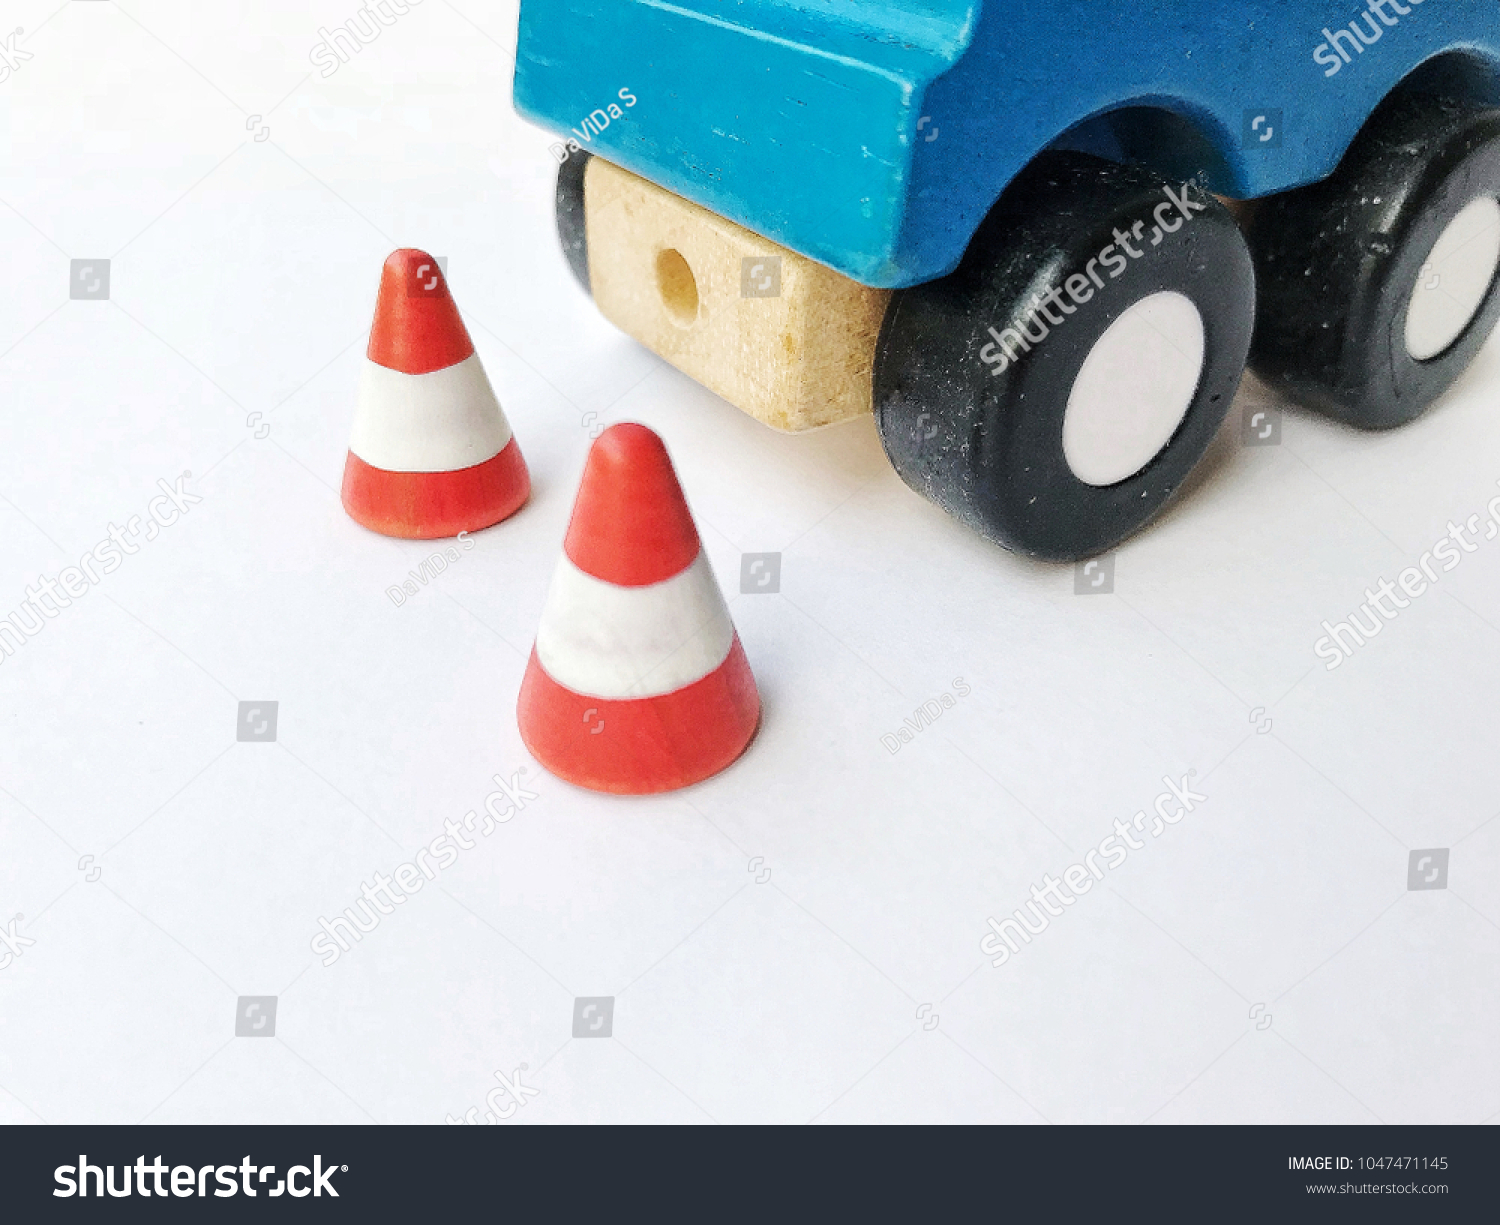 wooden toy : Car and traffic cone : traffic cone are place at the back of the car, be careful for parking, obstacle to drive #1047471145